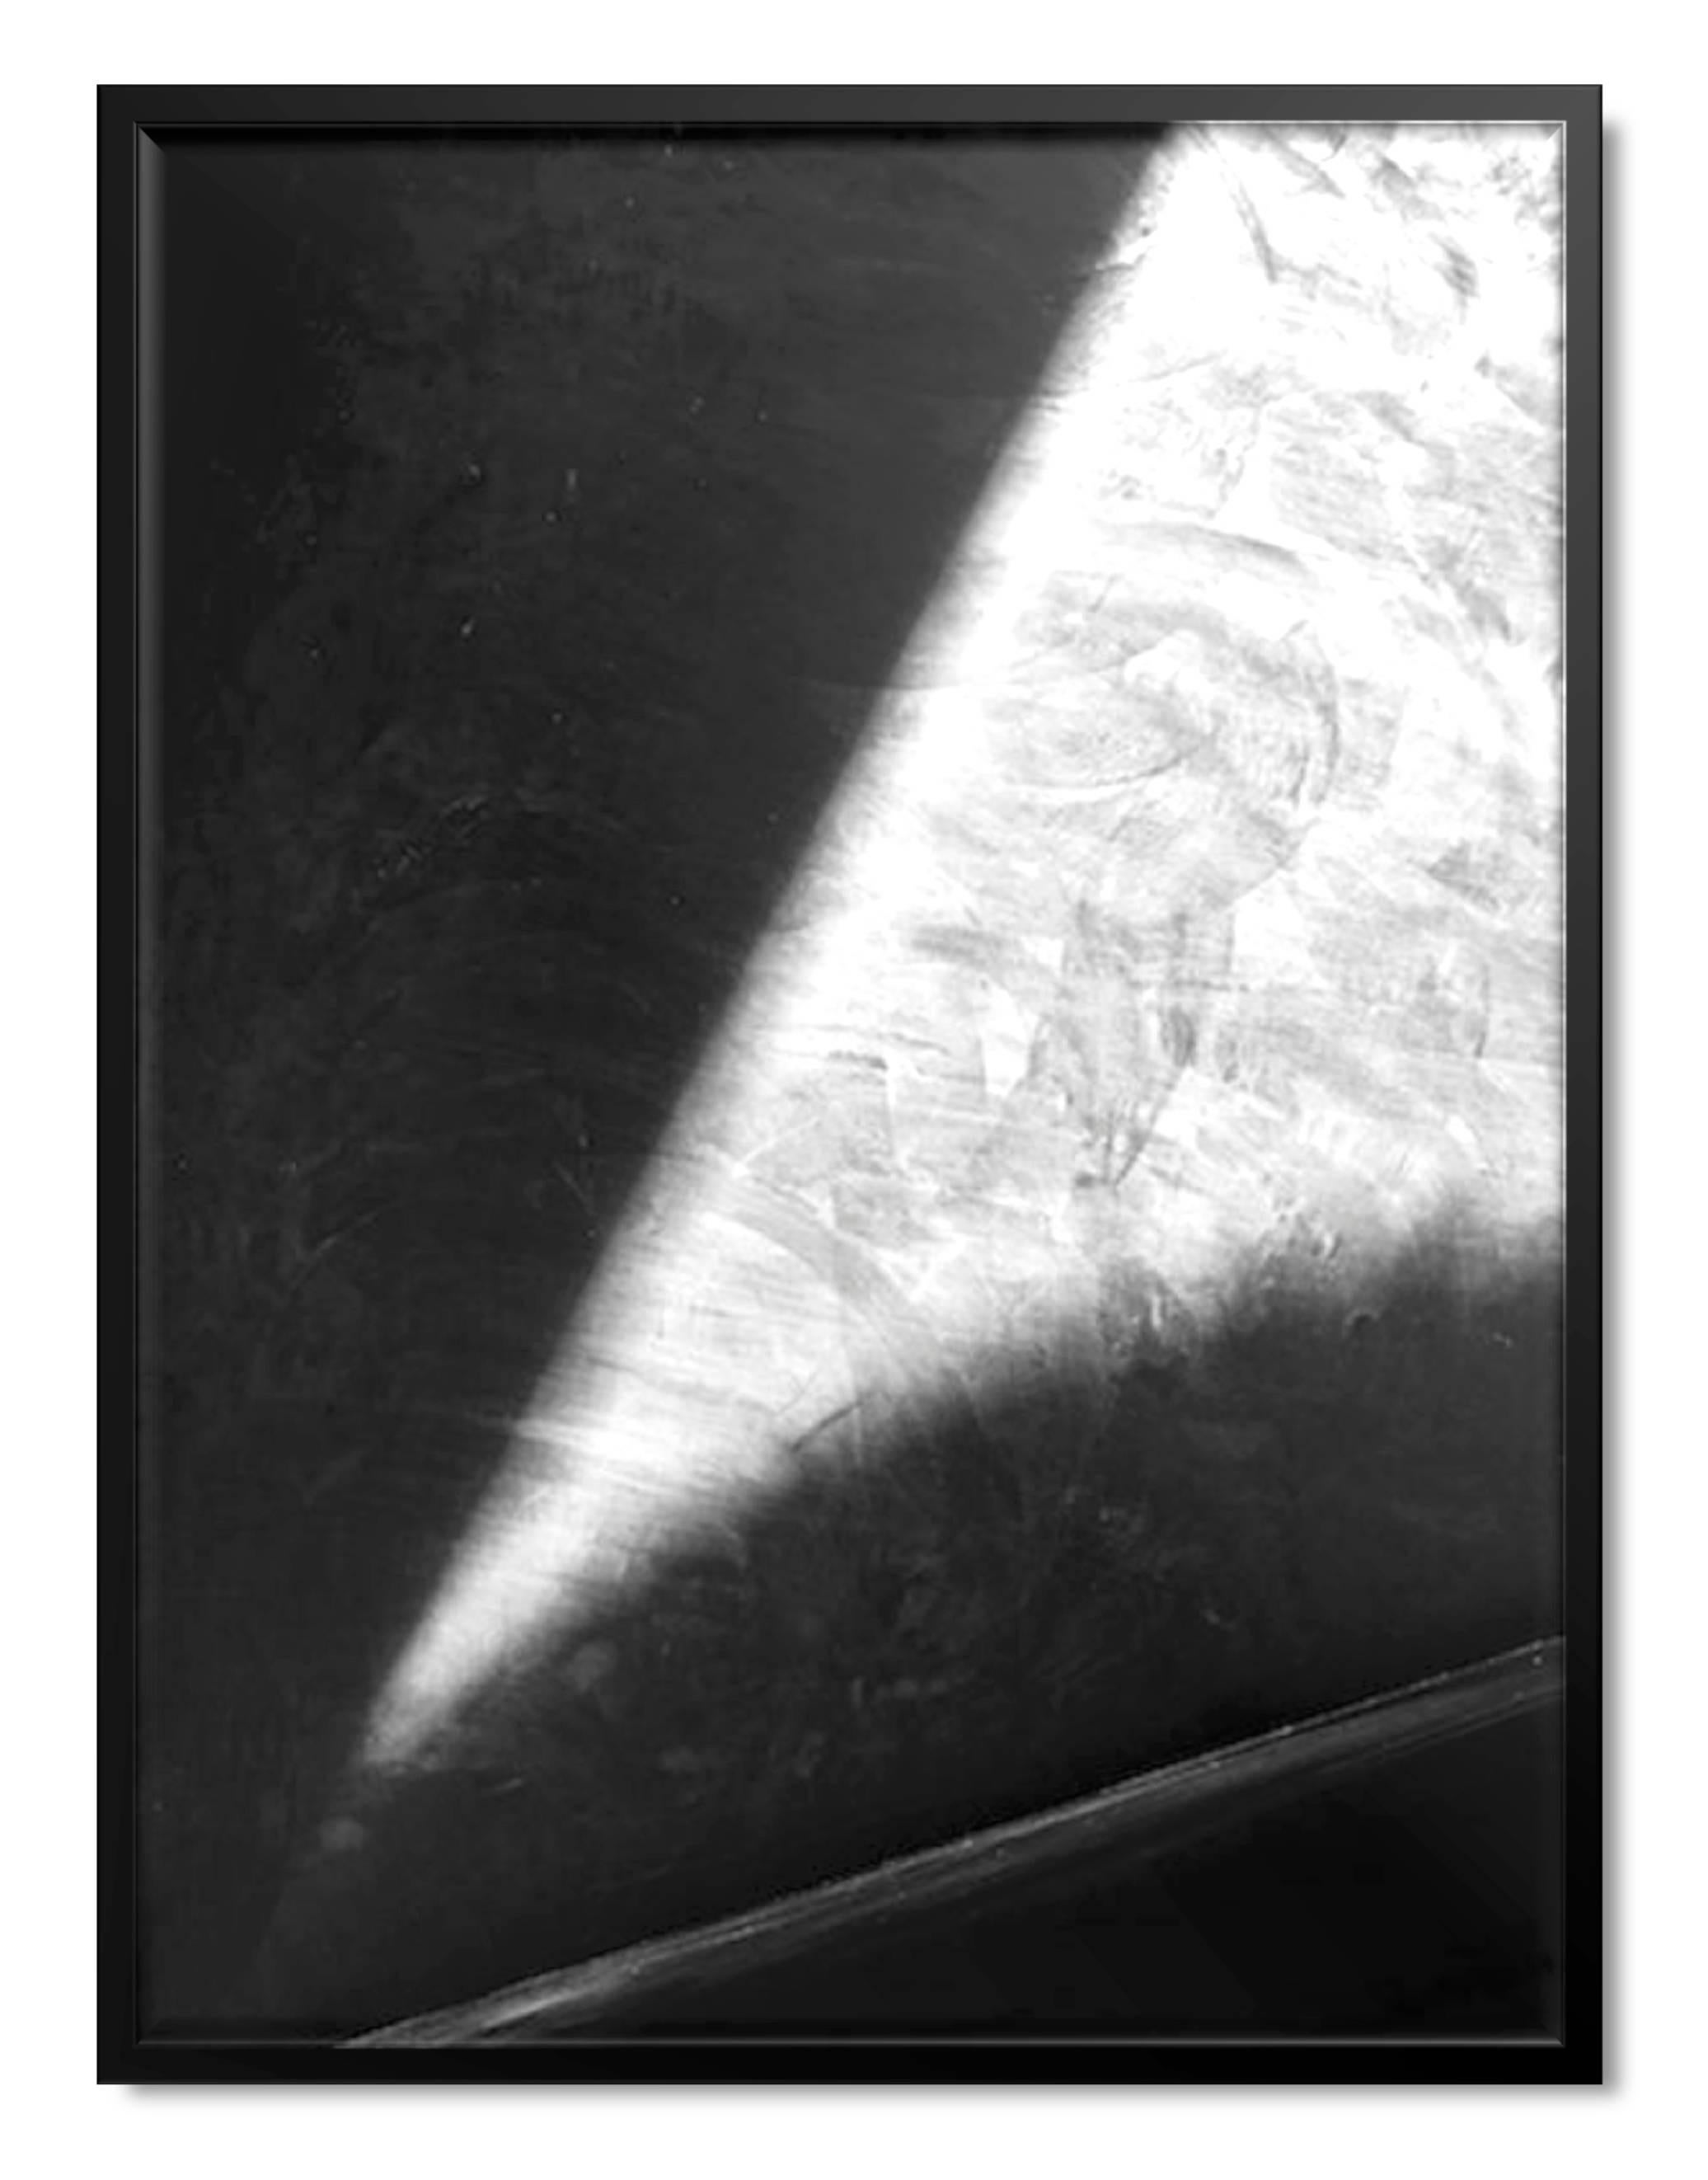 Grant Frost, "Untitled 17", 2014, Palladium print on Arches Platine paper, 19" x 15", Edition 1/3.
Framed in a simple black frame. Framed dimensions are 21" x 17".

Grant Frost's minimalist black and white